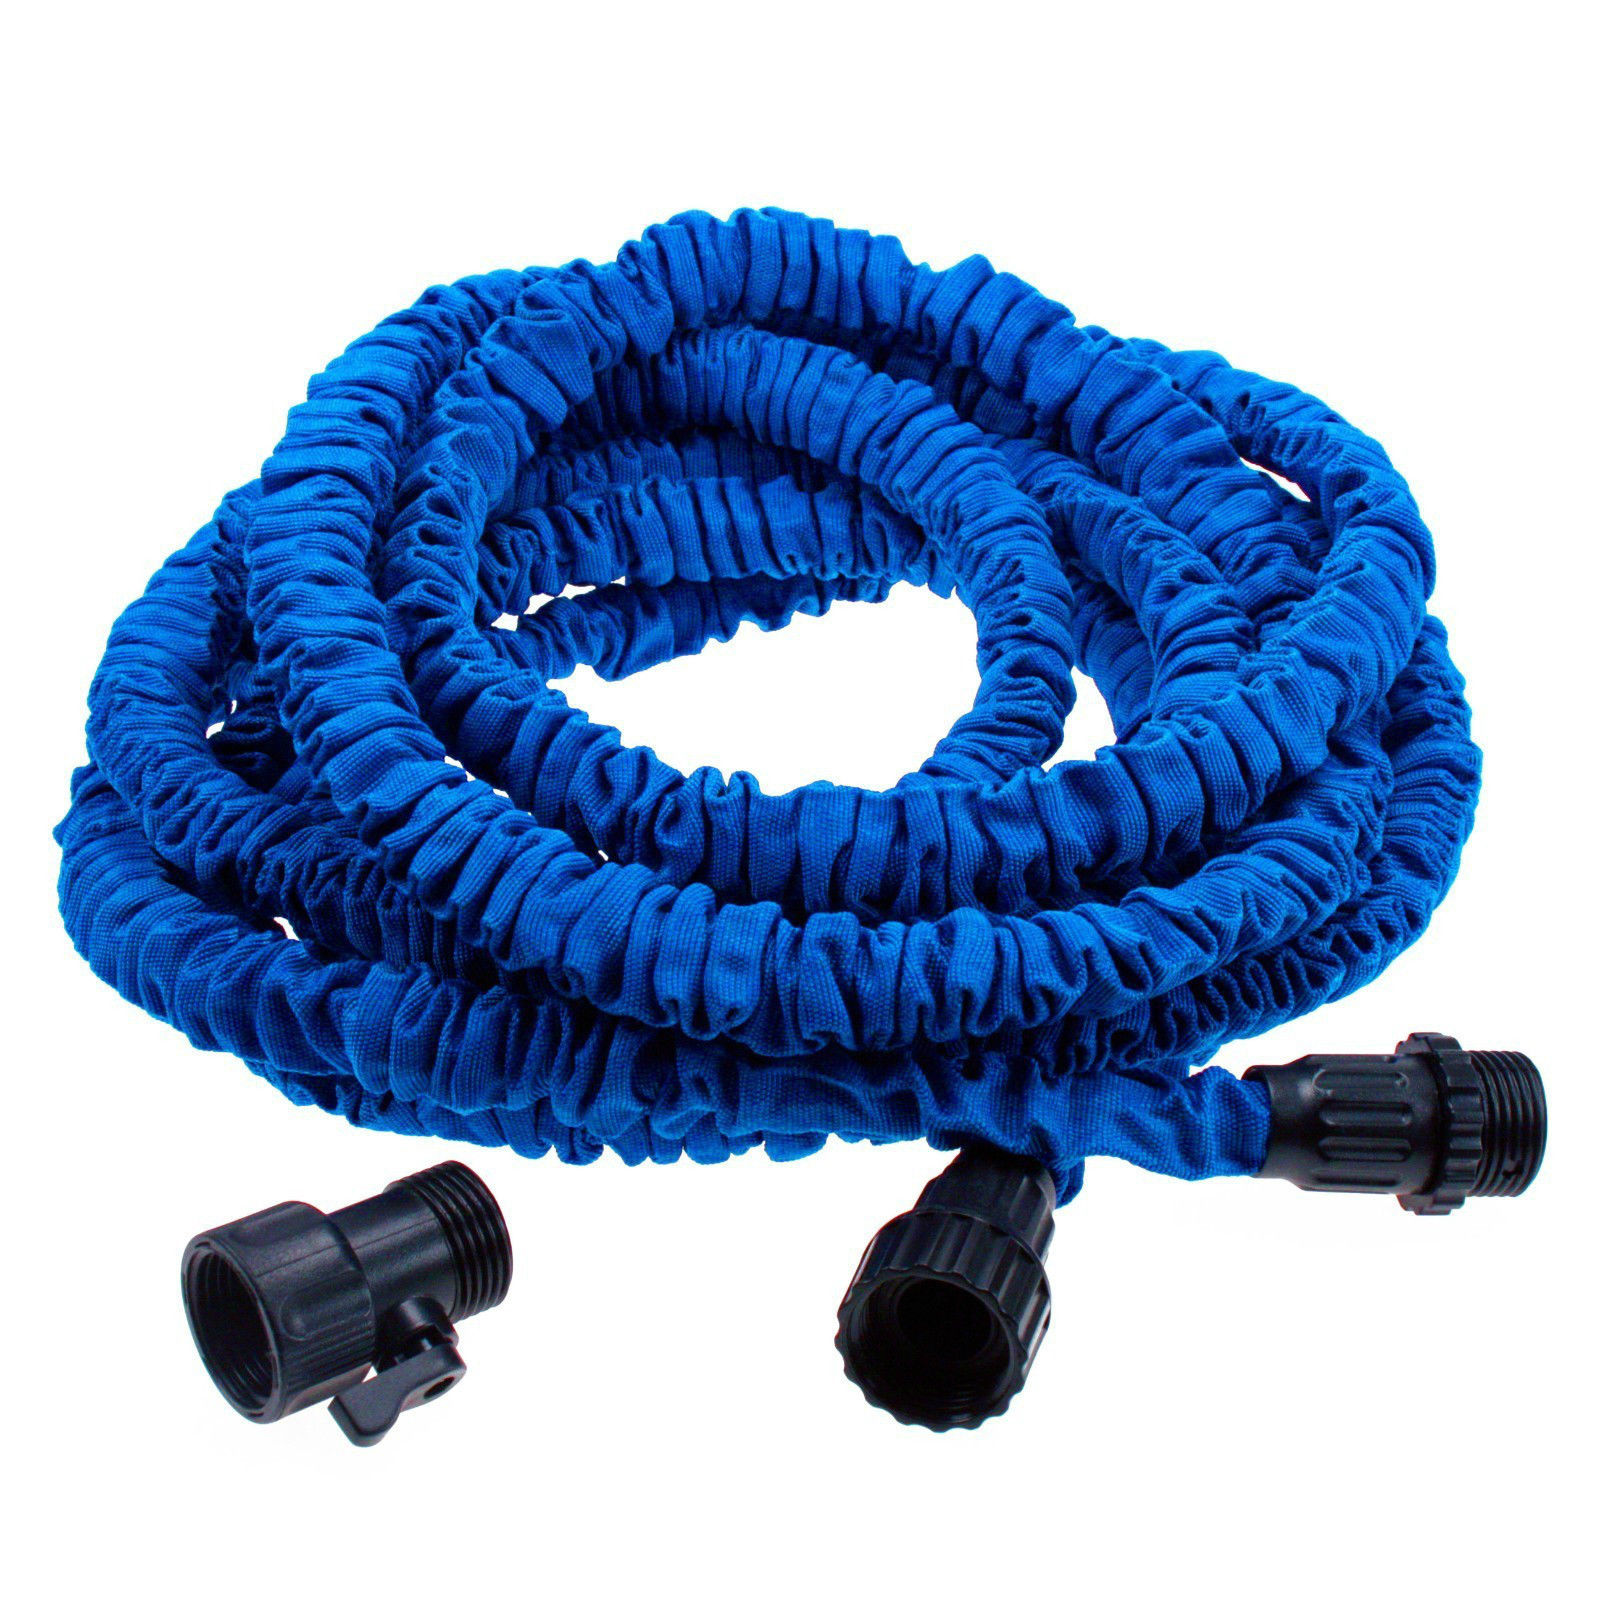 50ft Garden Water Hose Pocket Style As Seen on Expandable Hose $15.49 Queen of Reviews